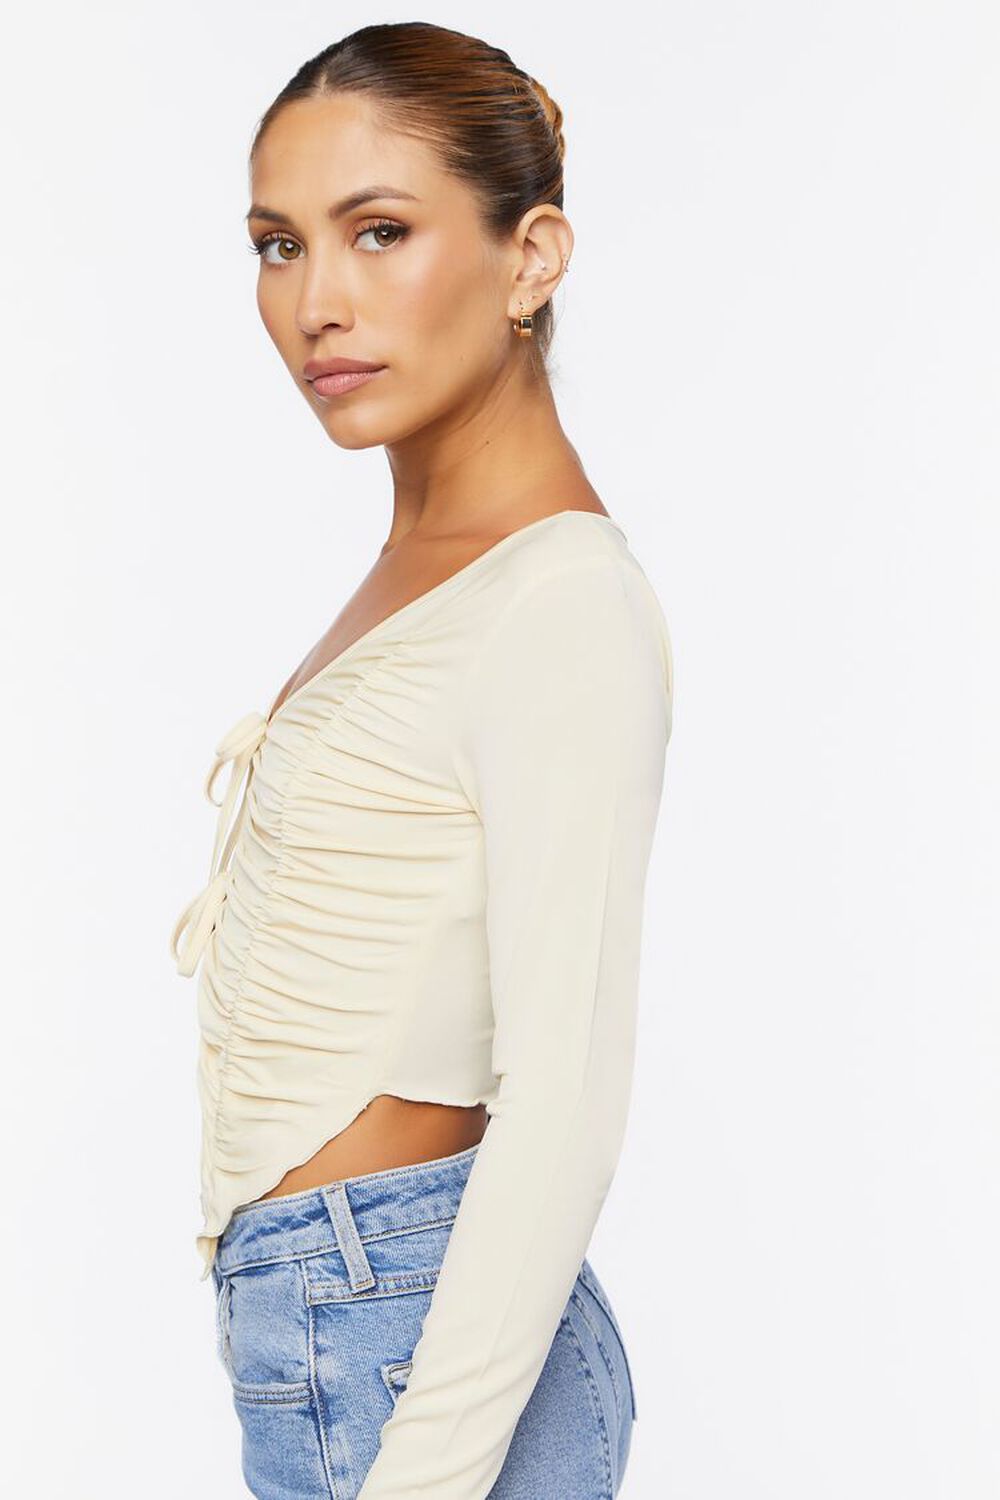 NATURAL Ruched Tie-Front Top, image 2